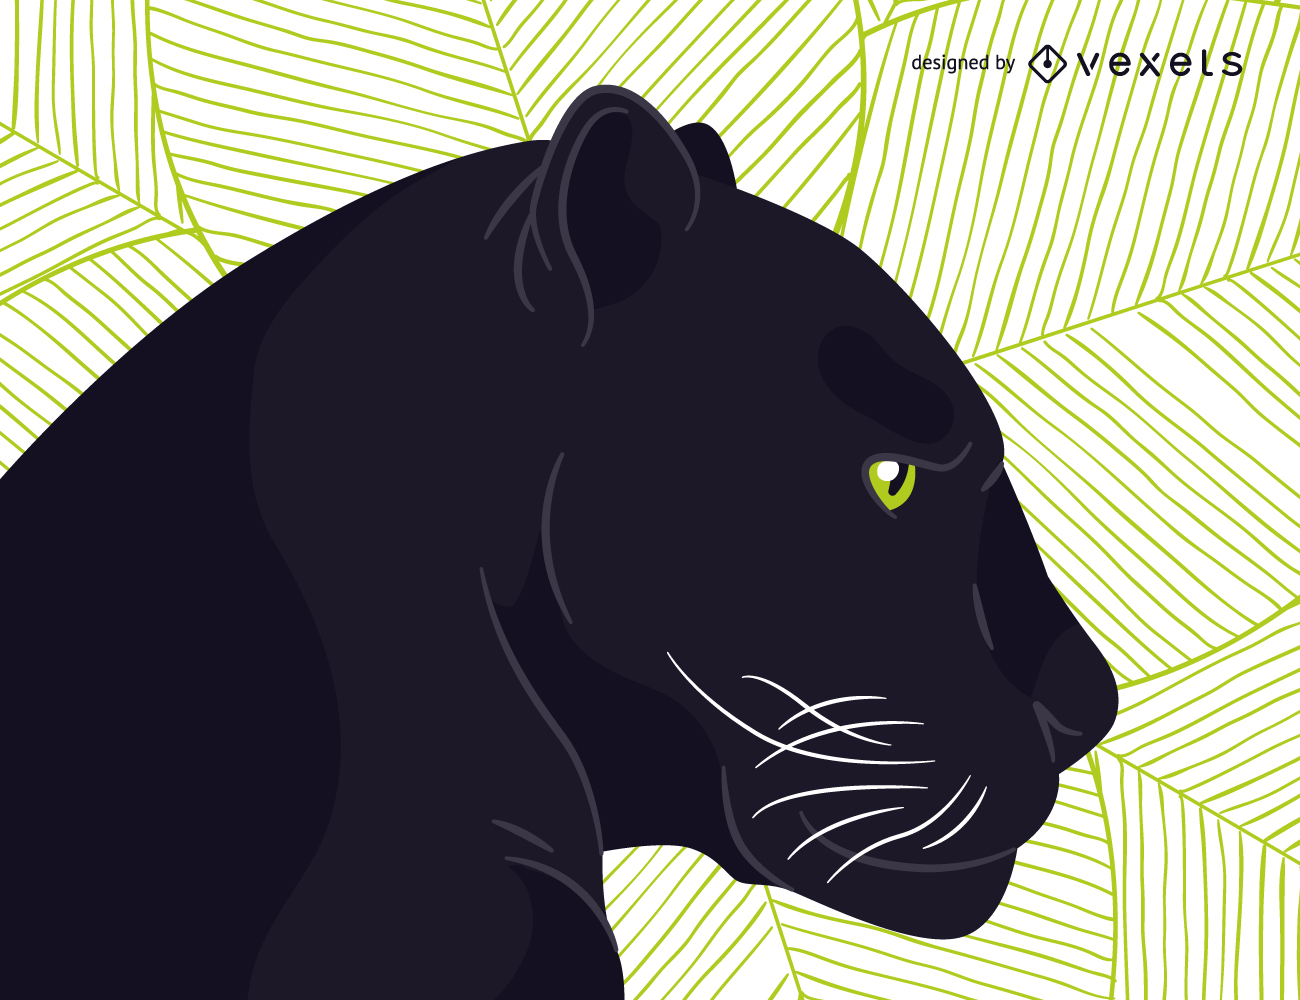 Black panther vector